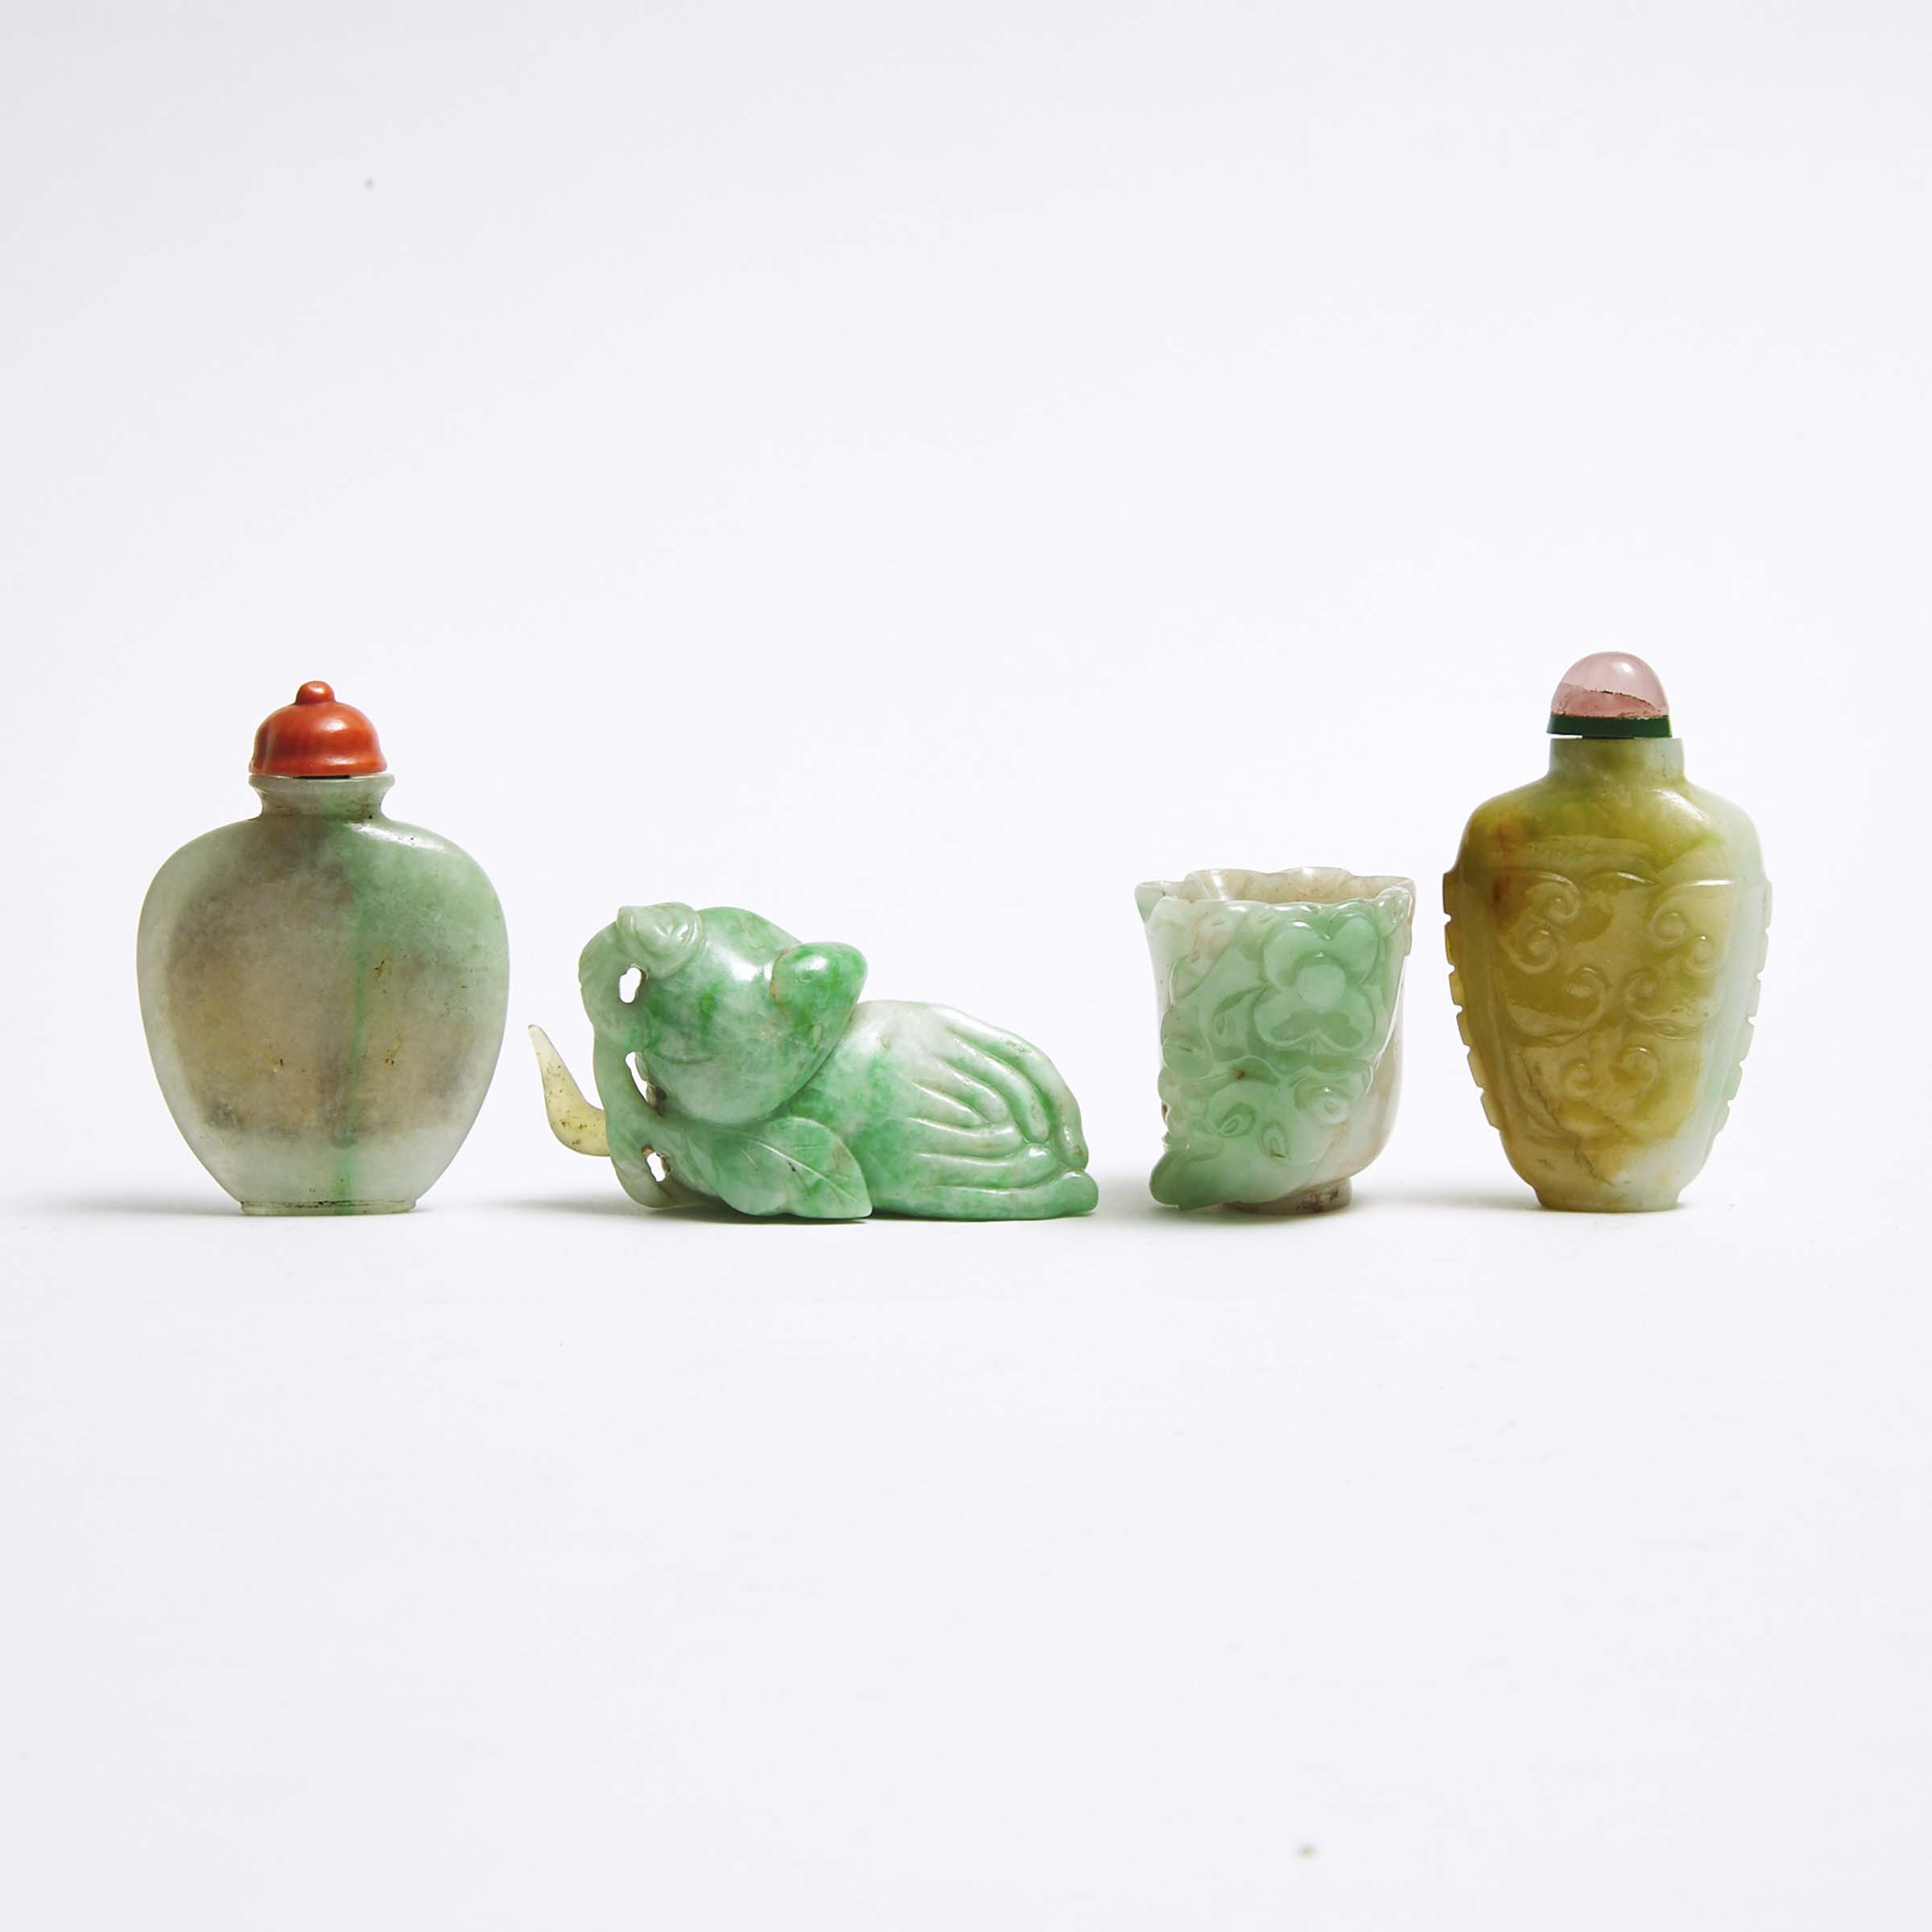 Two Jadeite Snuff Bottles, together with Two Jadeite Carvings, 19th/20th Century